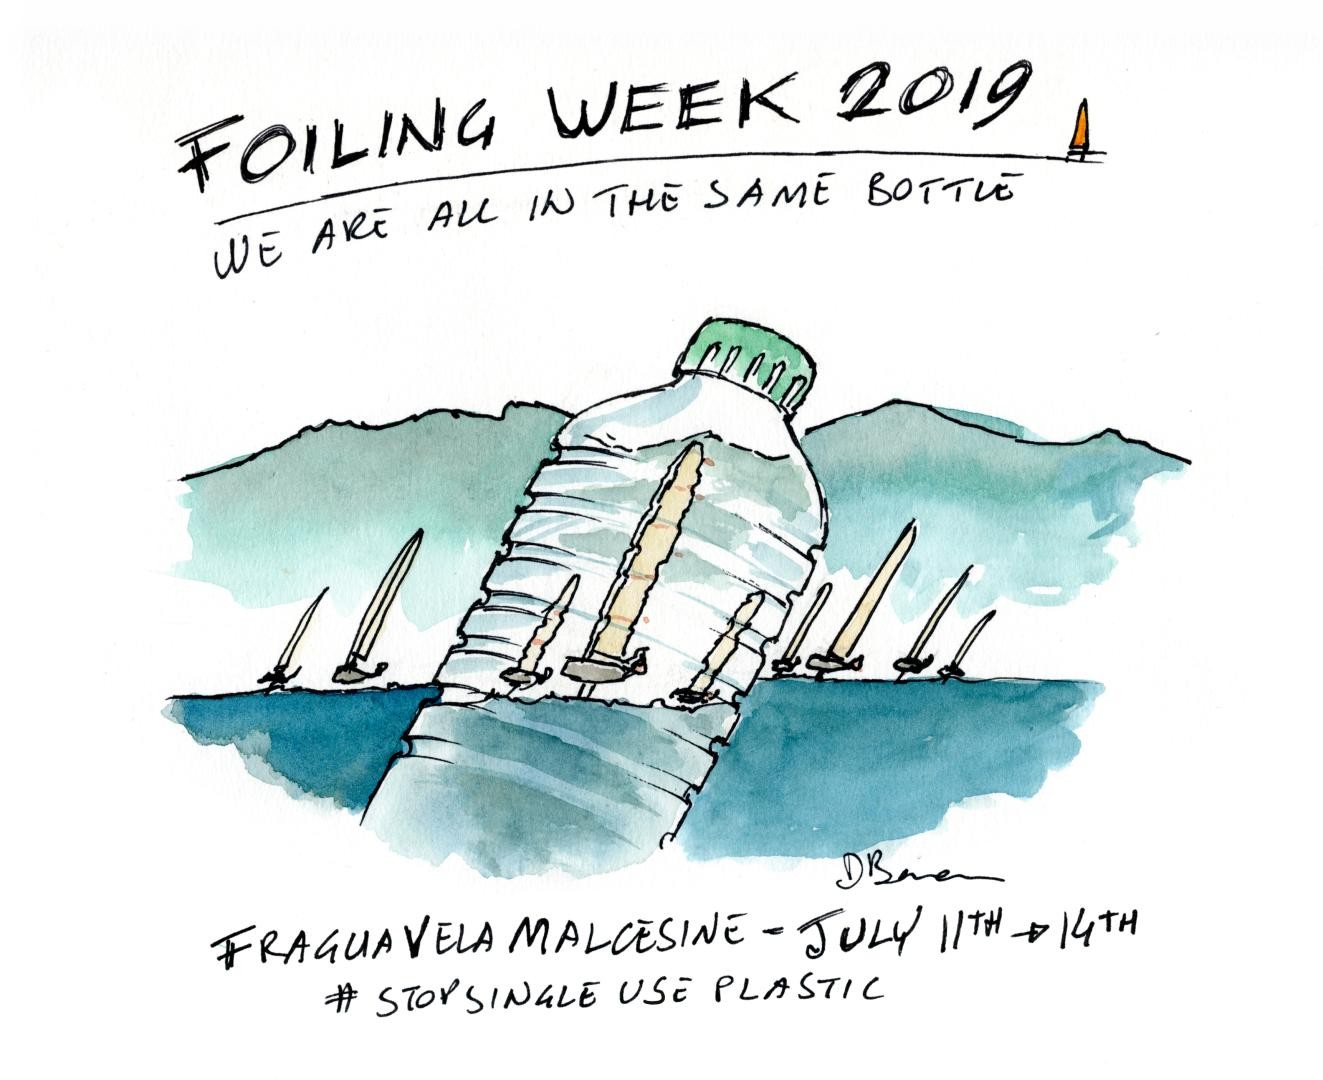 We are all in the same bottle - Foiling Week 2019